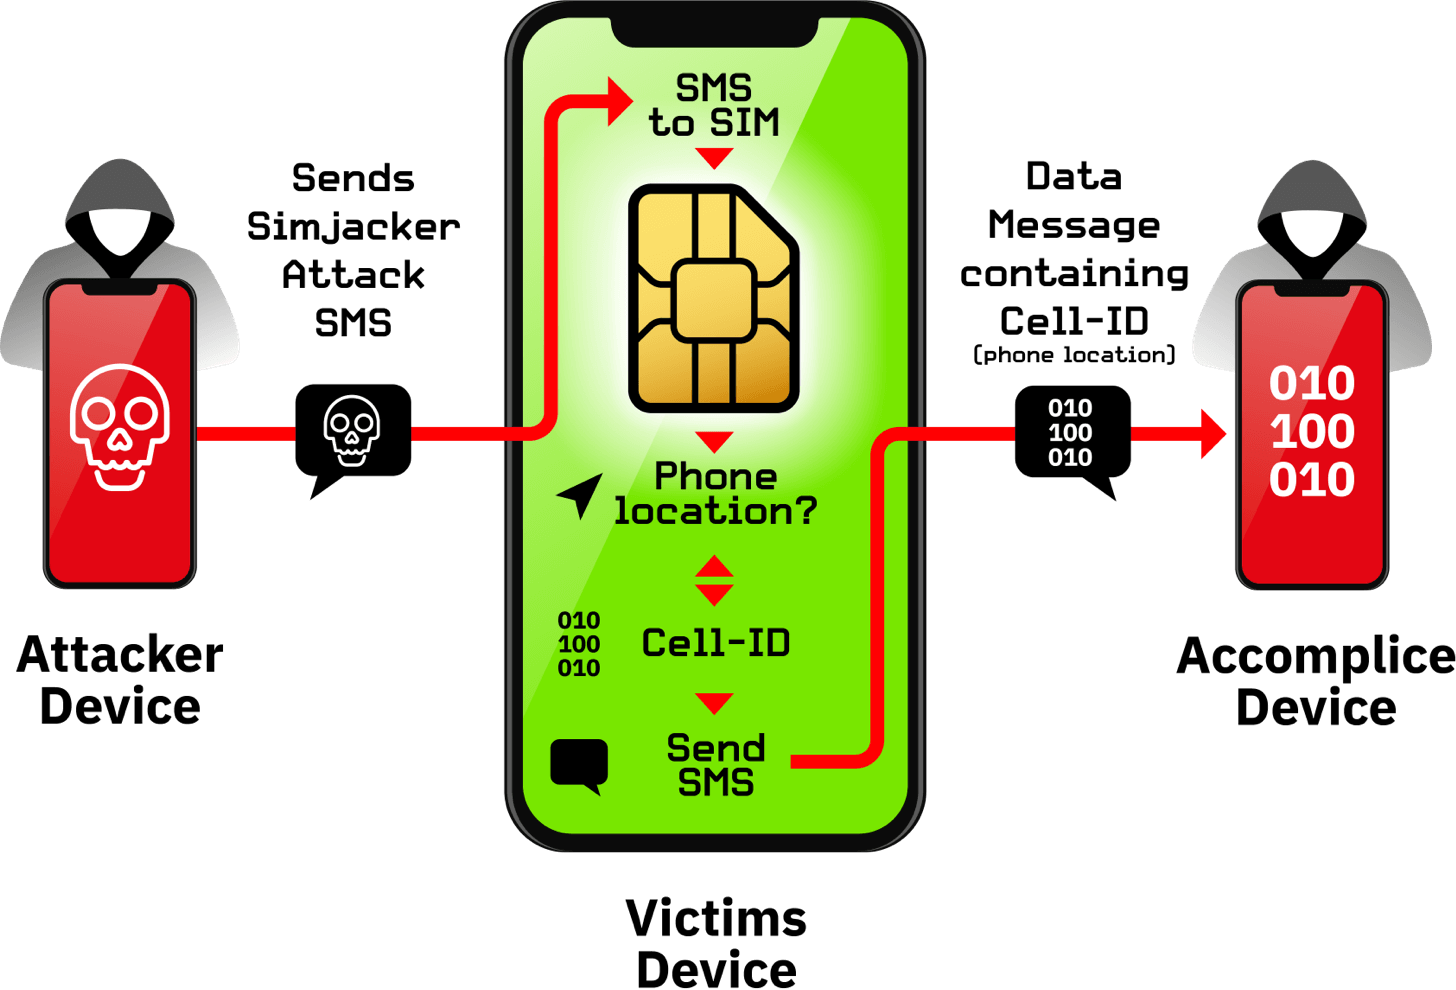 An attacker sends a Simjacker attack SMS from the attacker devie to the victim's device. In the victim's device, the SMS goes to the SIM card, instructing it to send an SMS with the phone's current cell ID to an accomplice deivce.